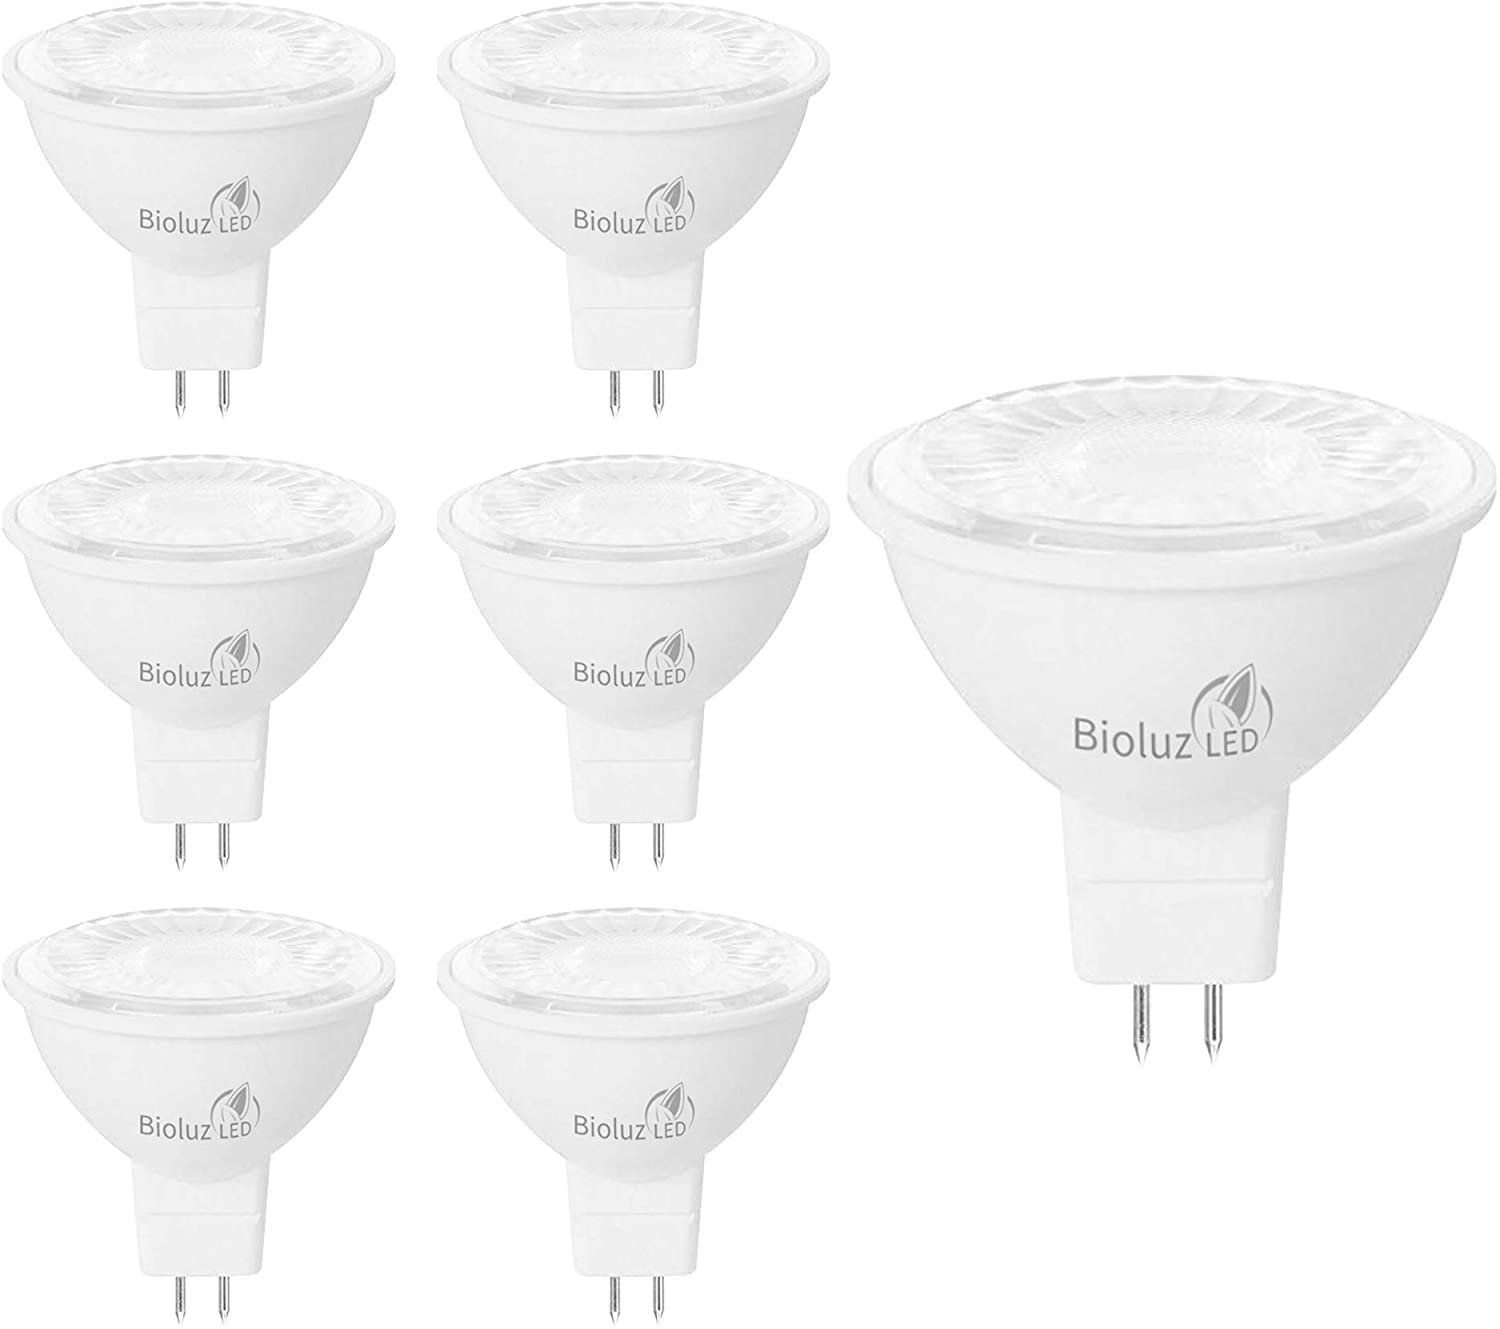 Bioluz LED MR16 LED Bulb 50W Halogen Replacement Non-Dimmable